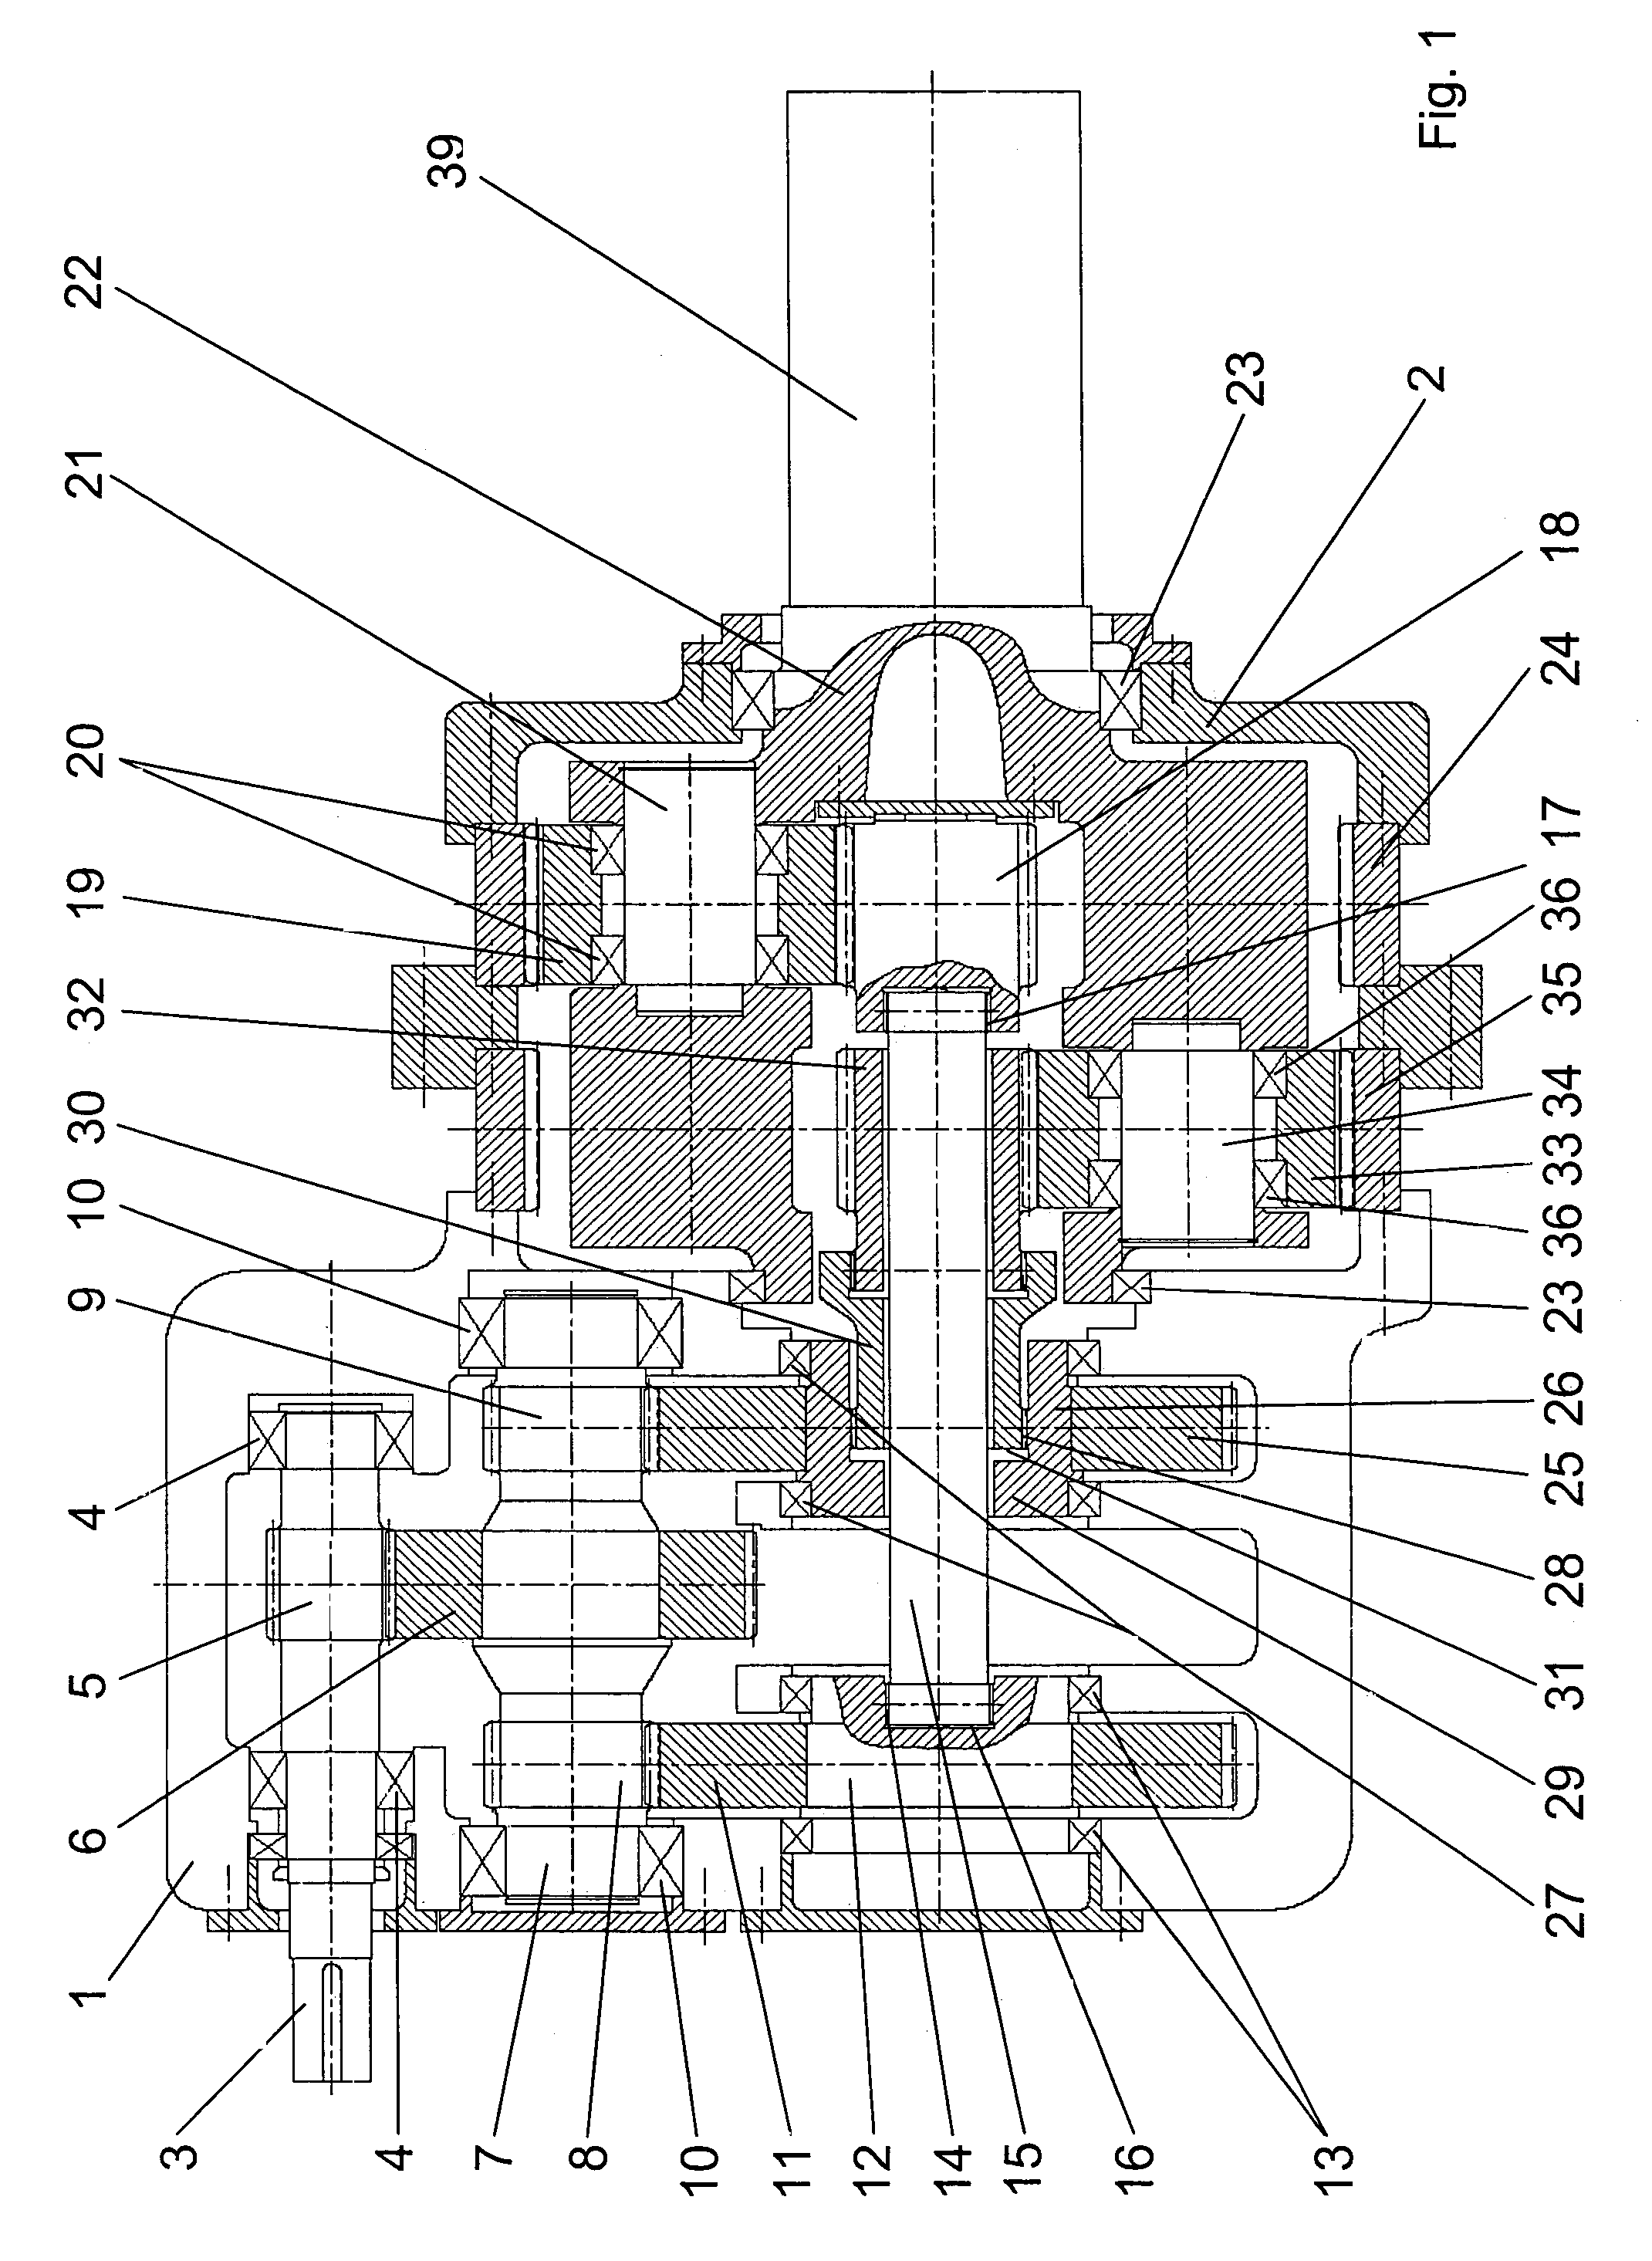 Gear unit for the drive of a rotation tube